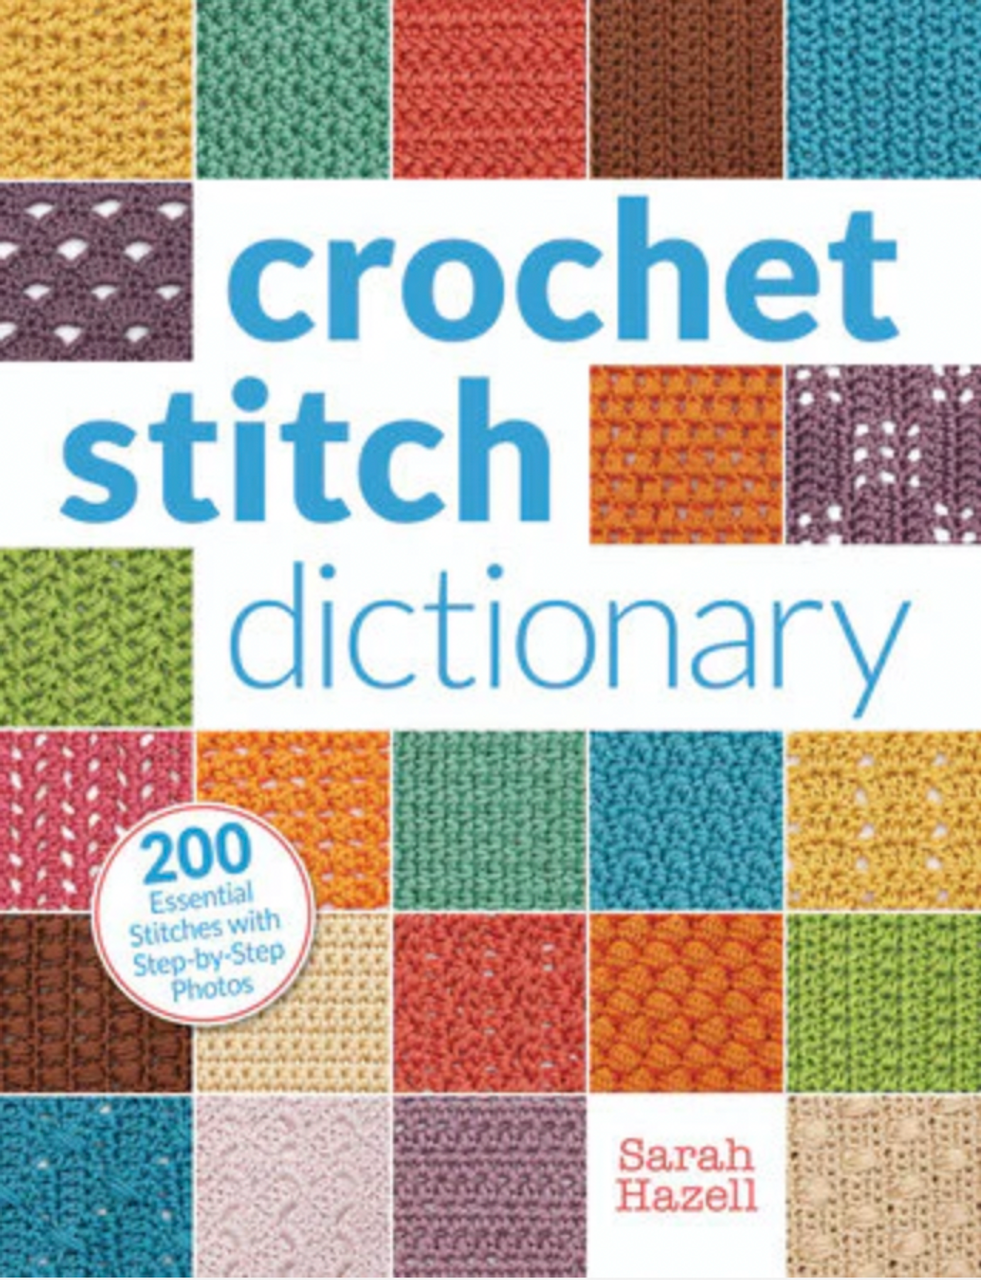 How to Knit, Knit Stitch Guide, Stitching Dictionary in 2023